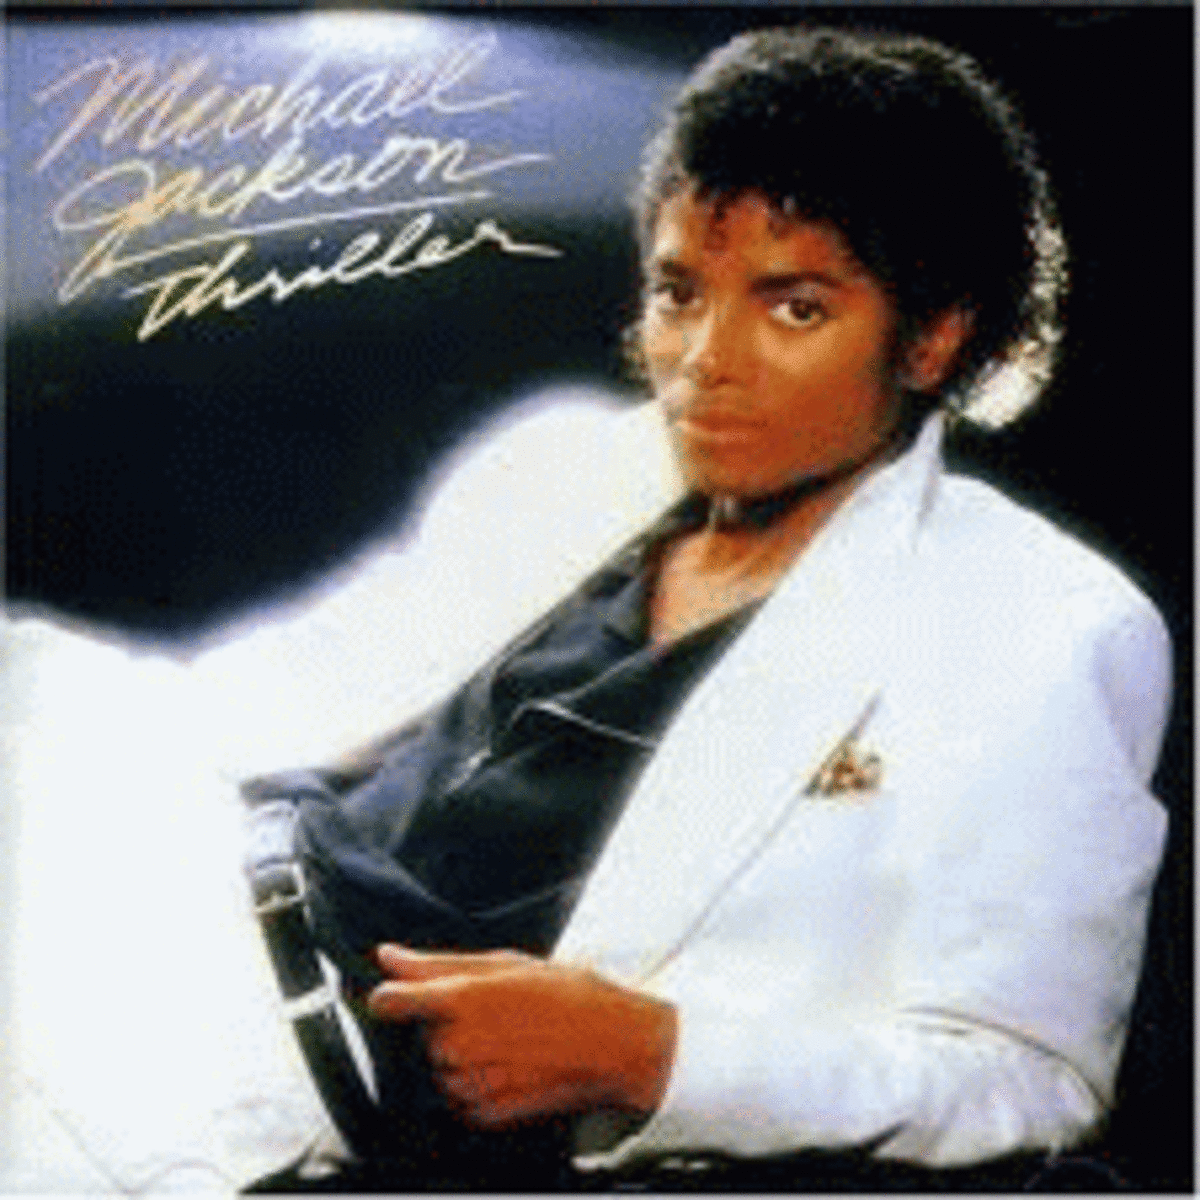 The Thriller Album was the best selling ever